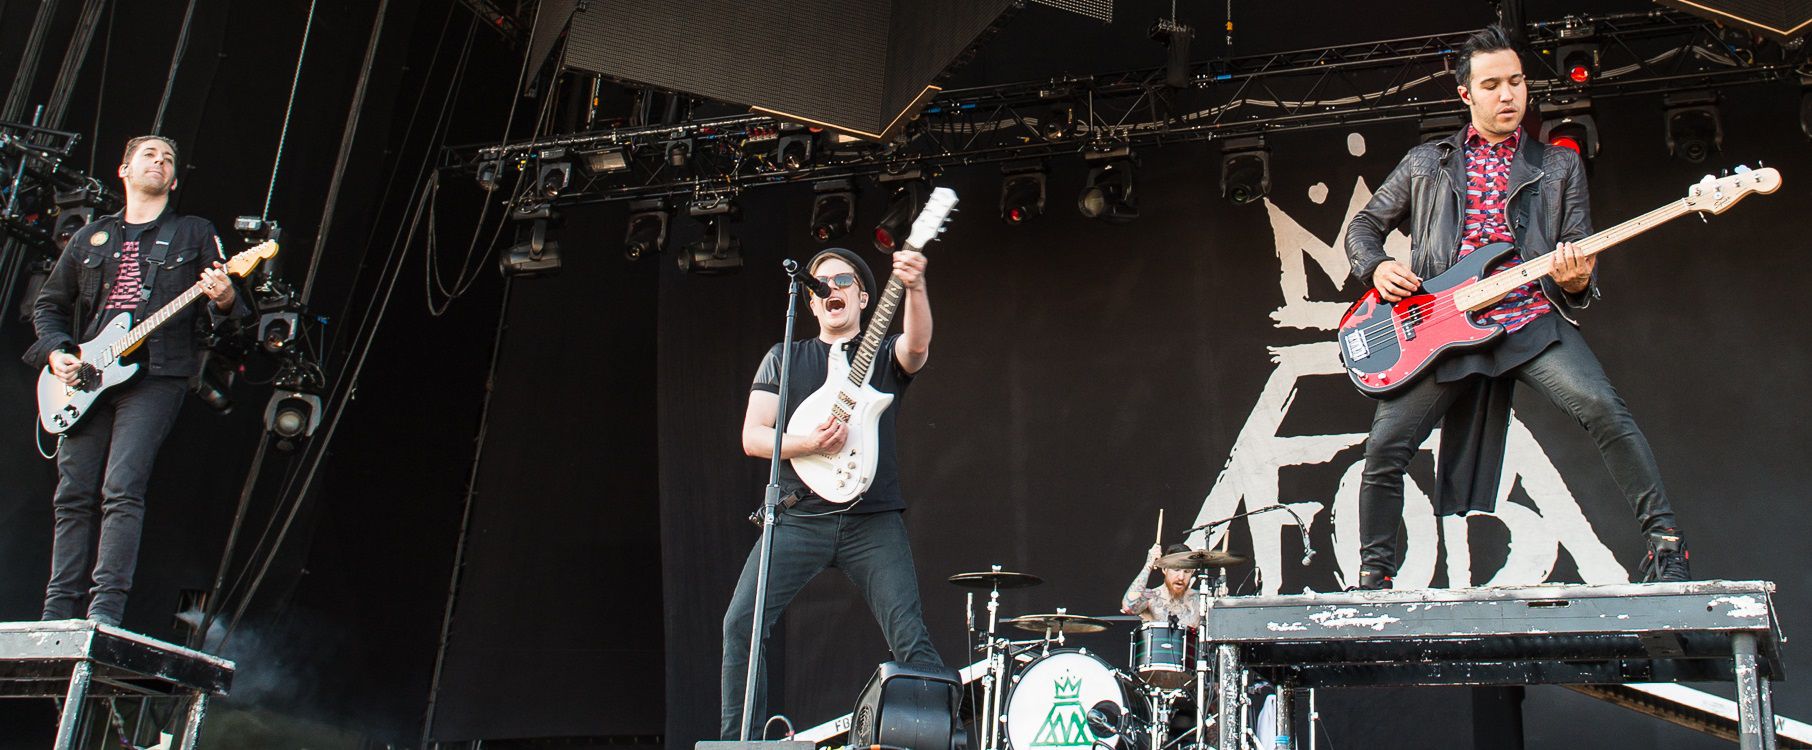 <p>The band reunited in 2013 with the release of "Save Rock and Roll" and the "Monumentour" tour. "American Beauty/American Psycho" was the third number one album for Fall Out Boy. The band has been <a href="https://falloutboy.com/tour">touring and creating new music</a> ever since reuniting.</p>